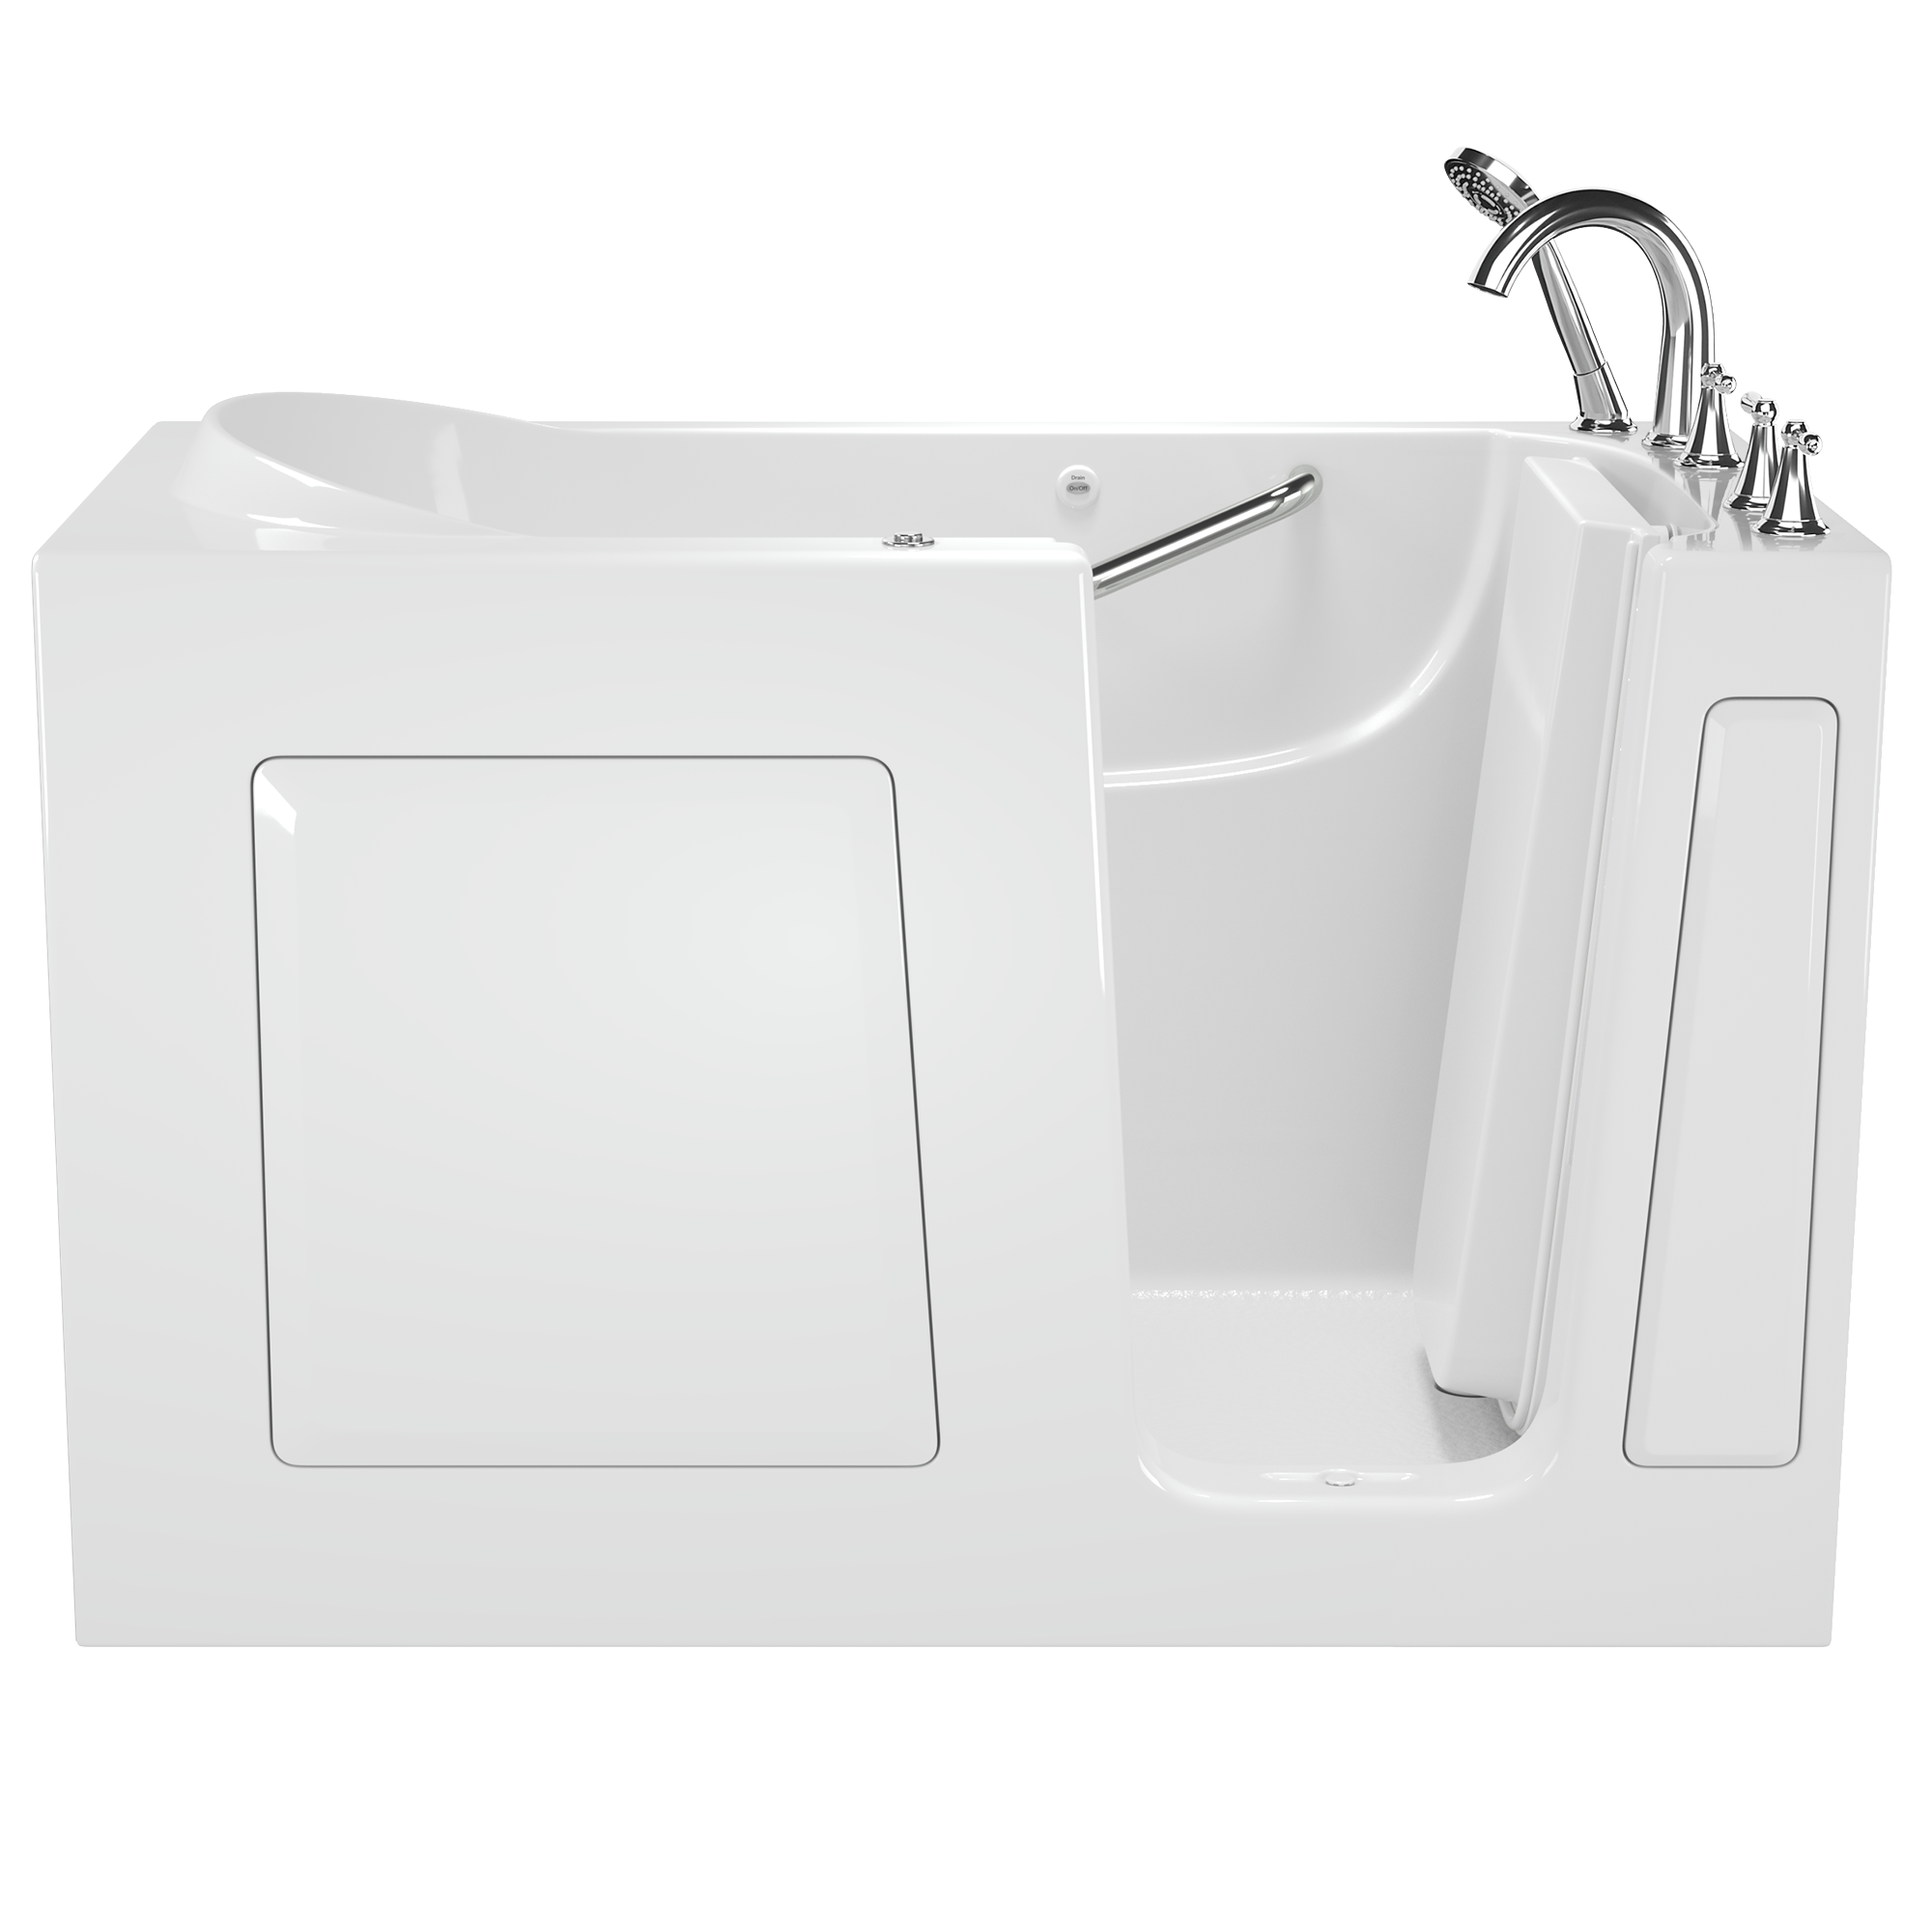 Gelcoat Value Series 60x30-Inch Walk-In Bathtub with Whirlpool Massage System - Right Hand Door and Drain